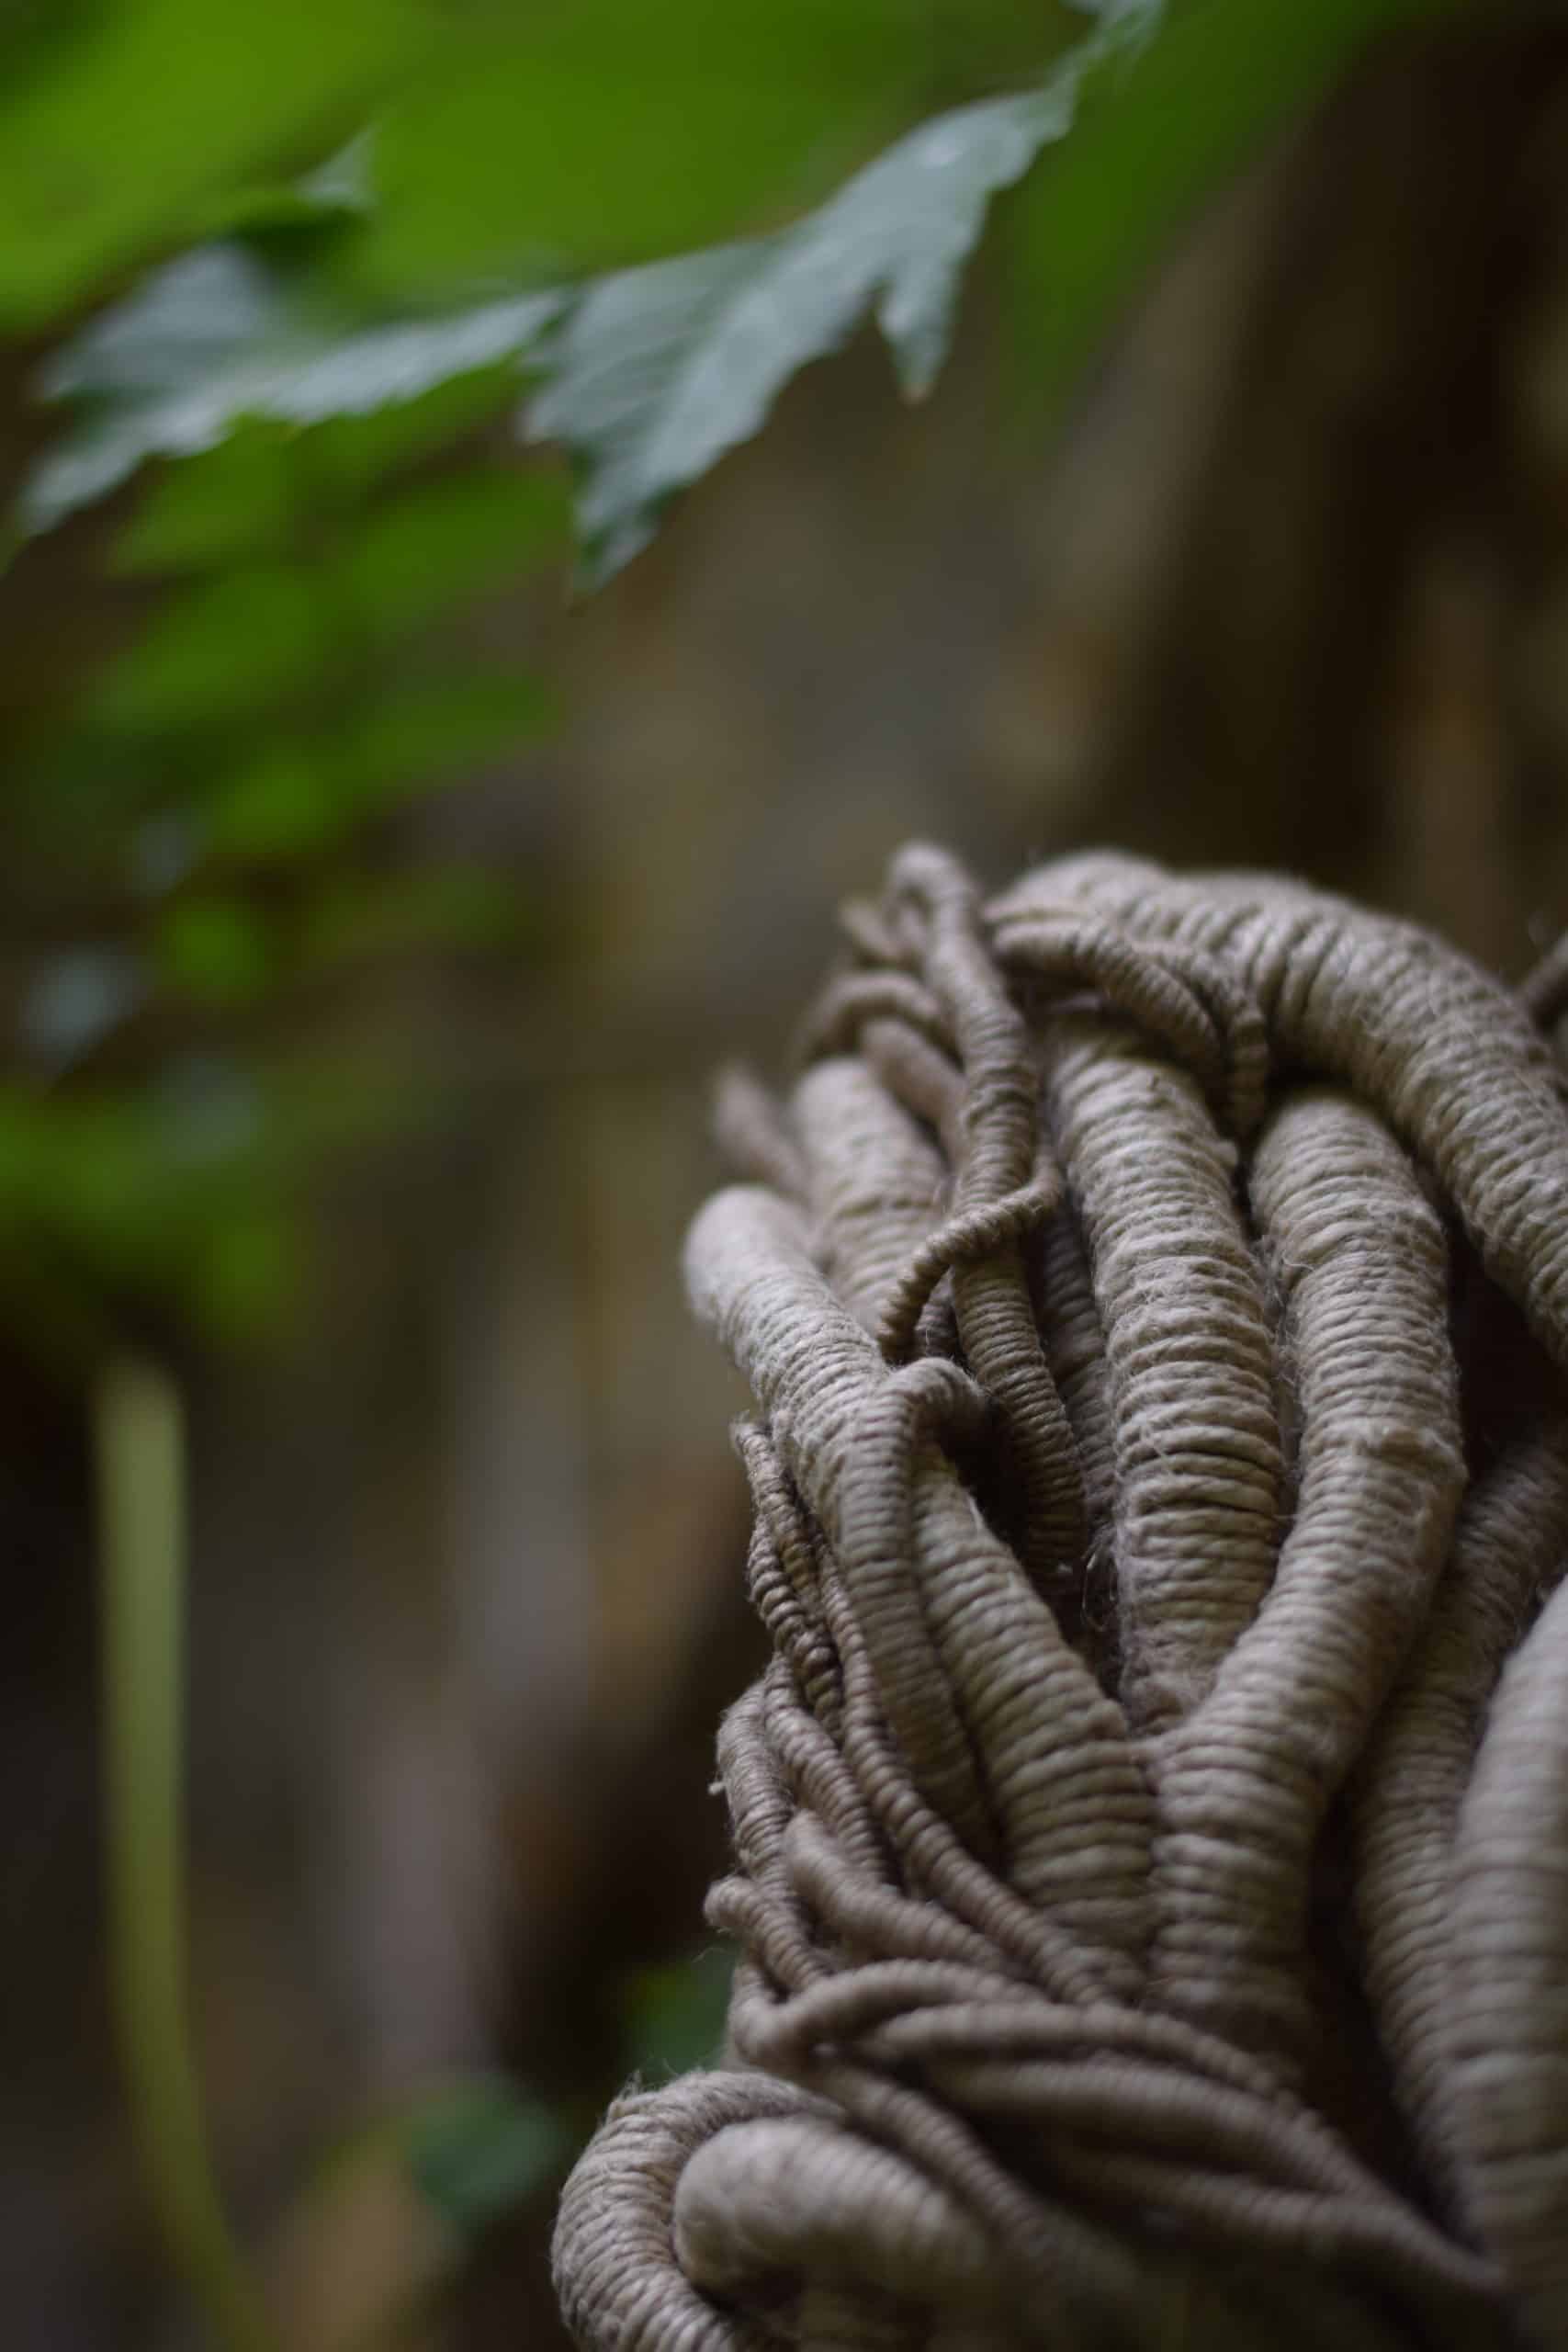 Undyed sculpture in greenery by Aude Franjou